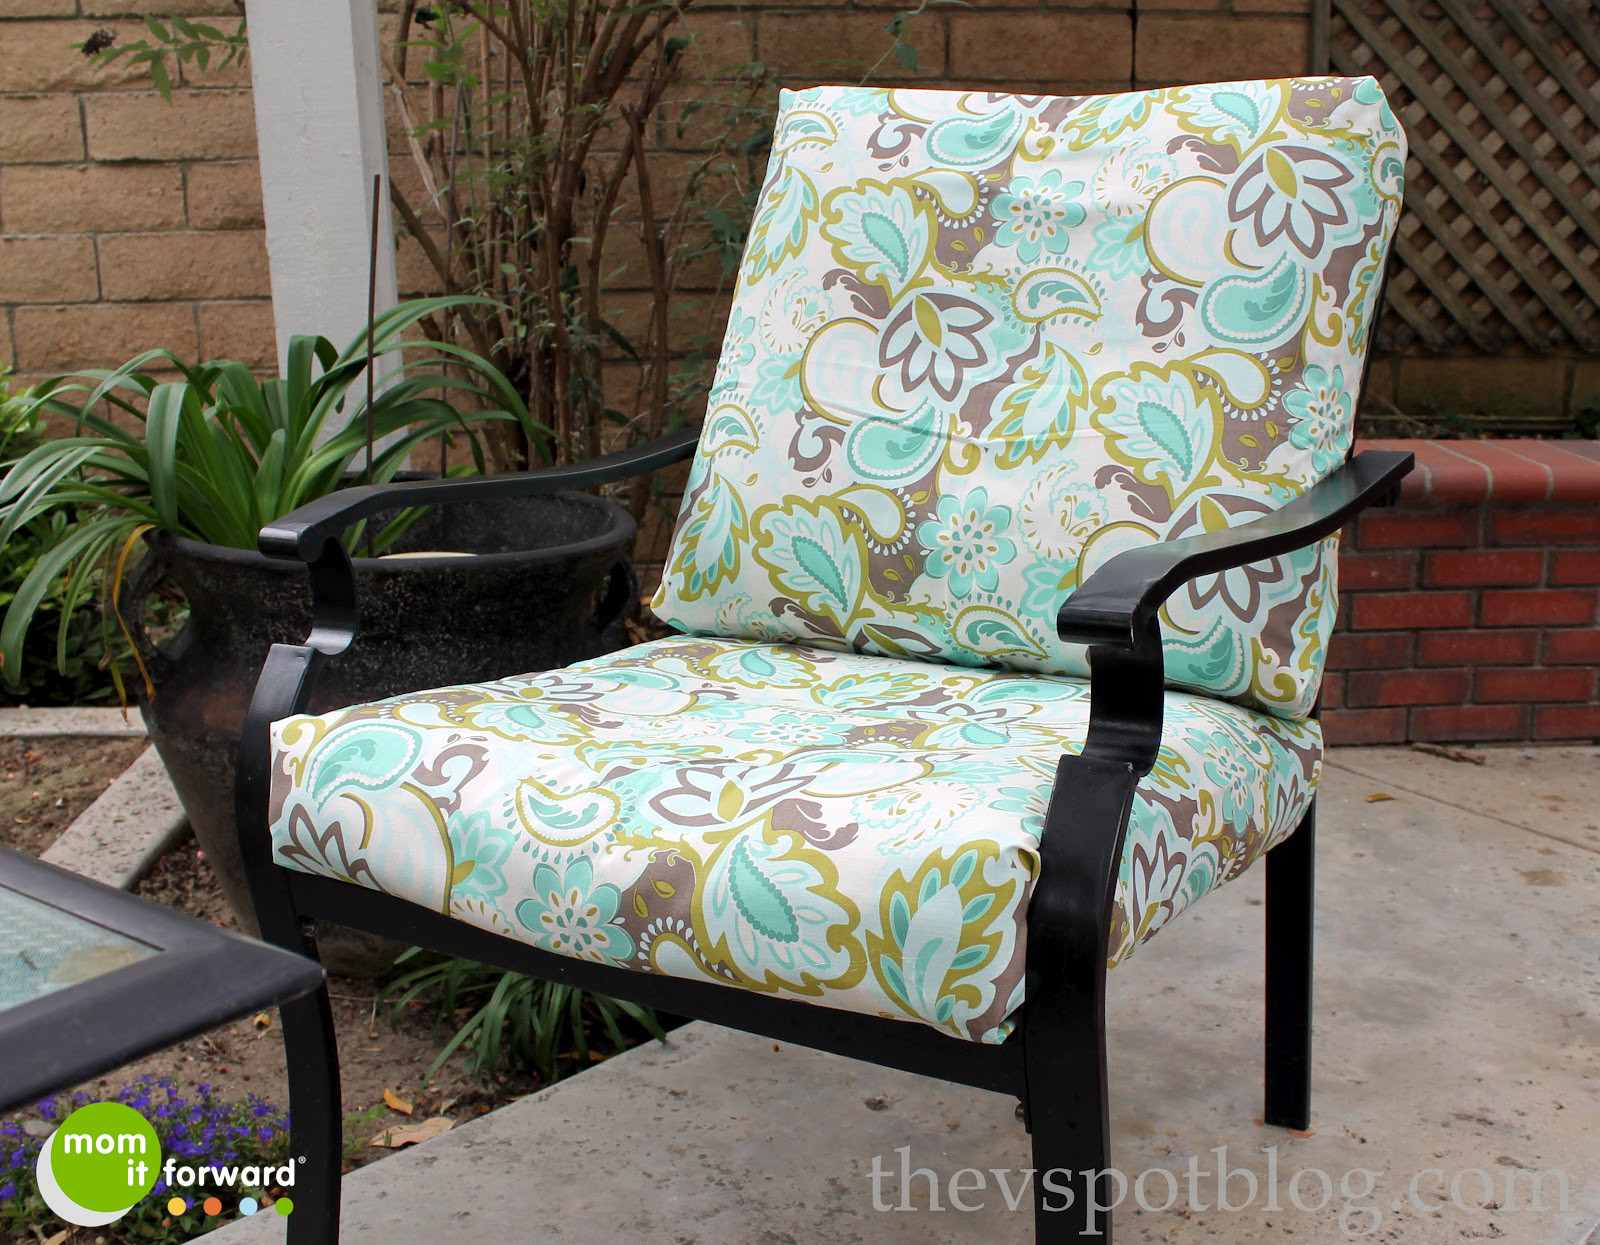 DIY Outdoor Bench Cushion
 DIY How to Recover Outdoor Furniture With a Glue Gun